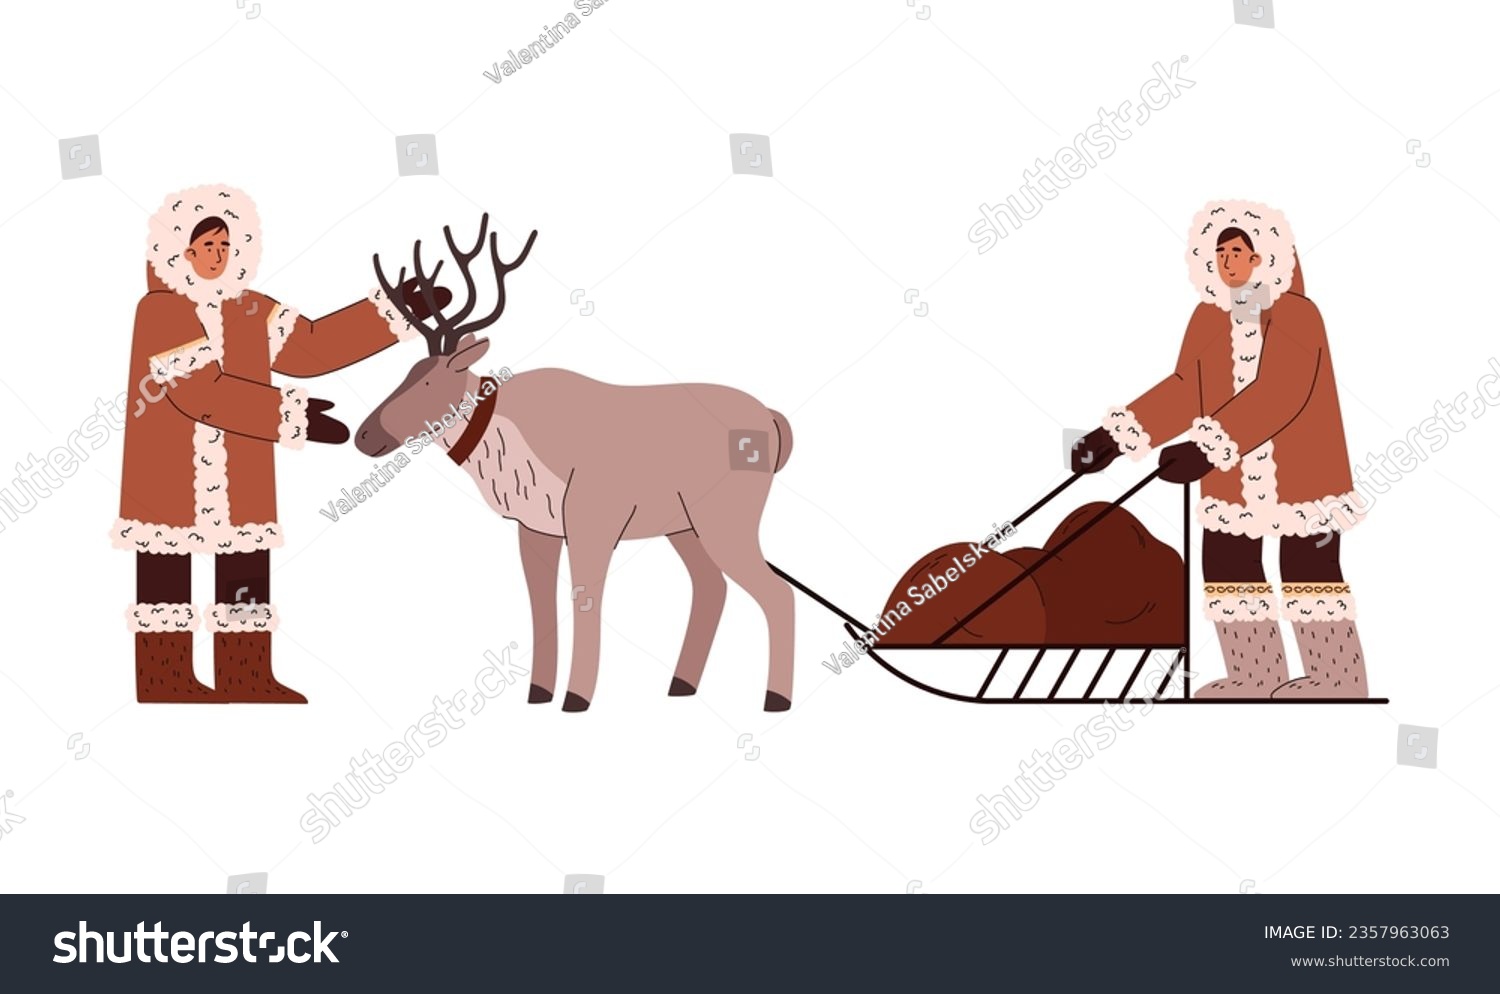 Eskimos driving a harness with reindeer, cartoon flat vector illustration isolated on white background. Eskimos peoples of the north and Arctic carton characters. #2357963063